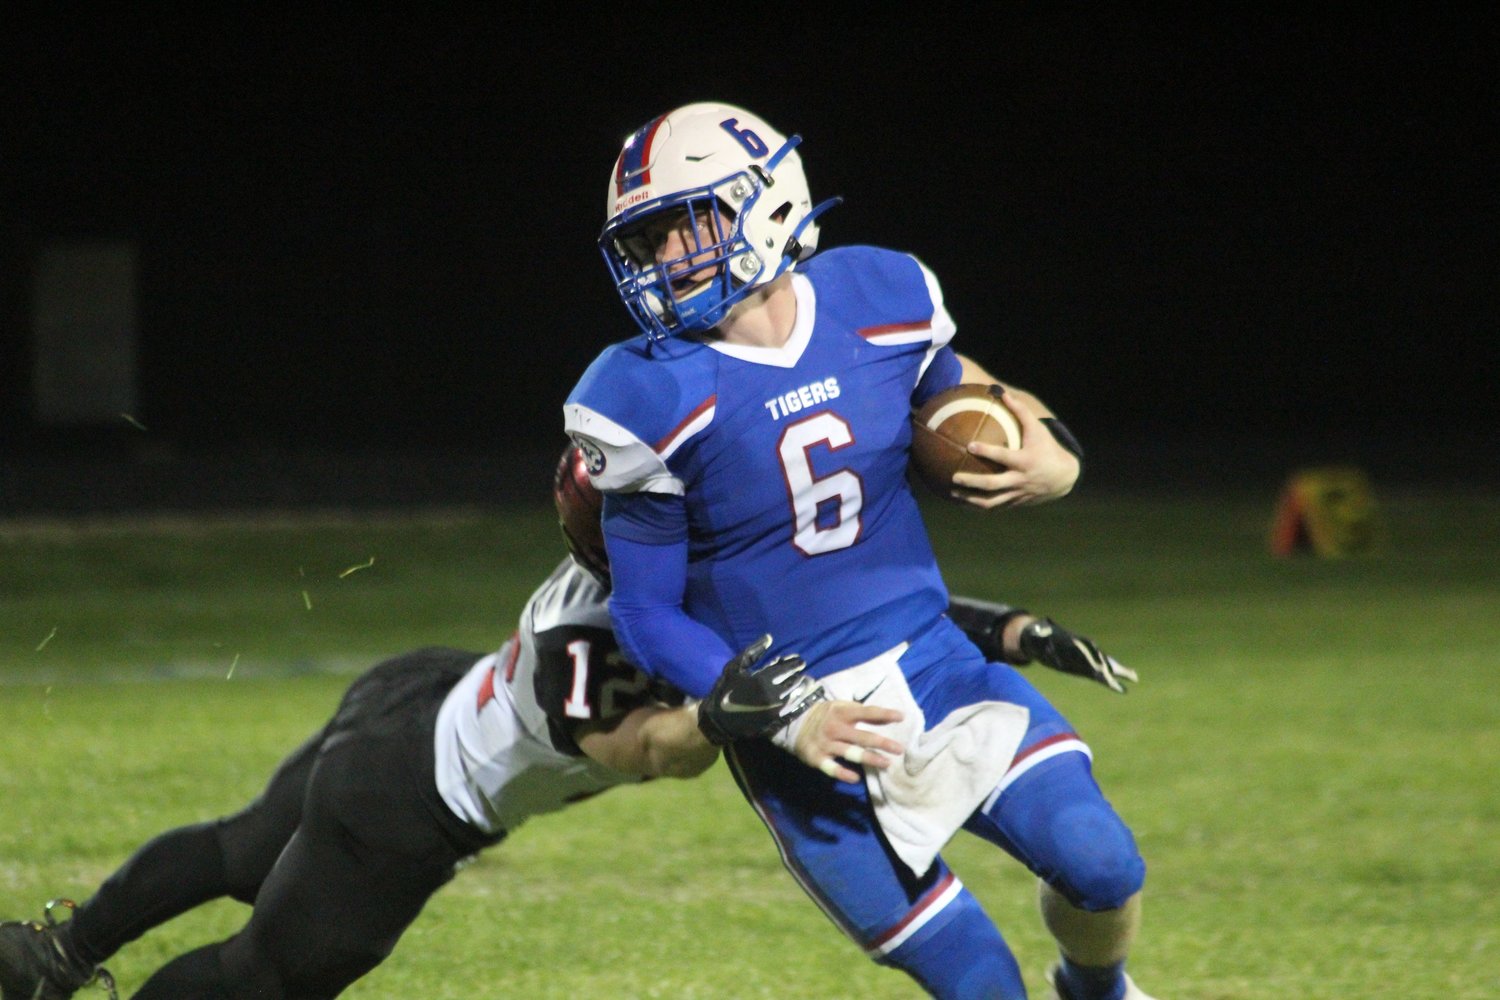 Daily Express file photo of Scotland County quarterback Hayden Long.